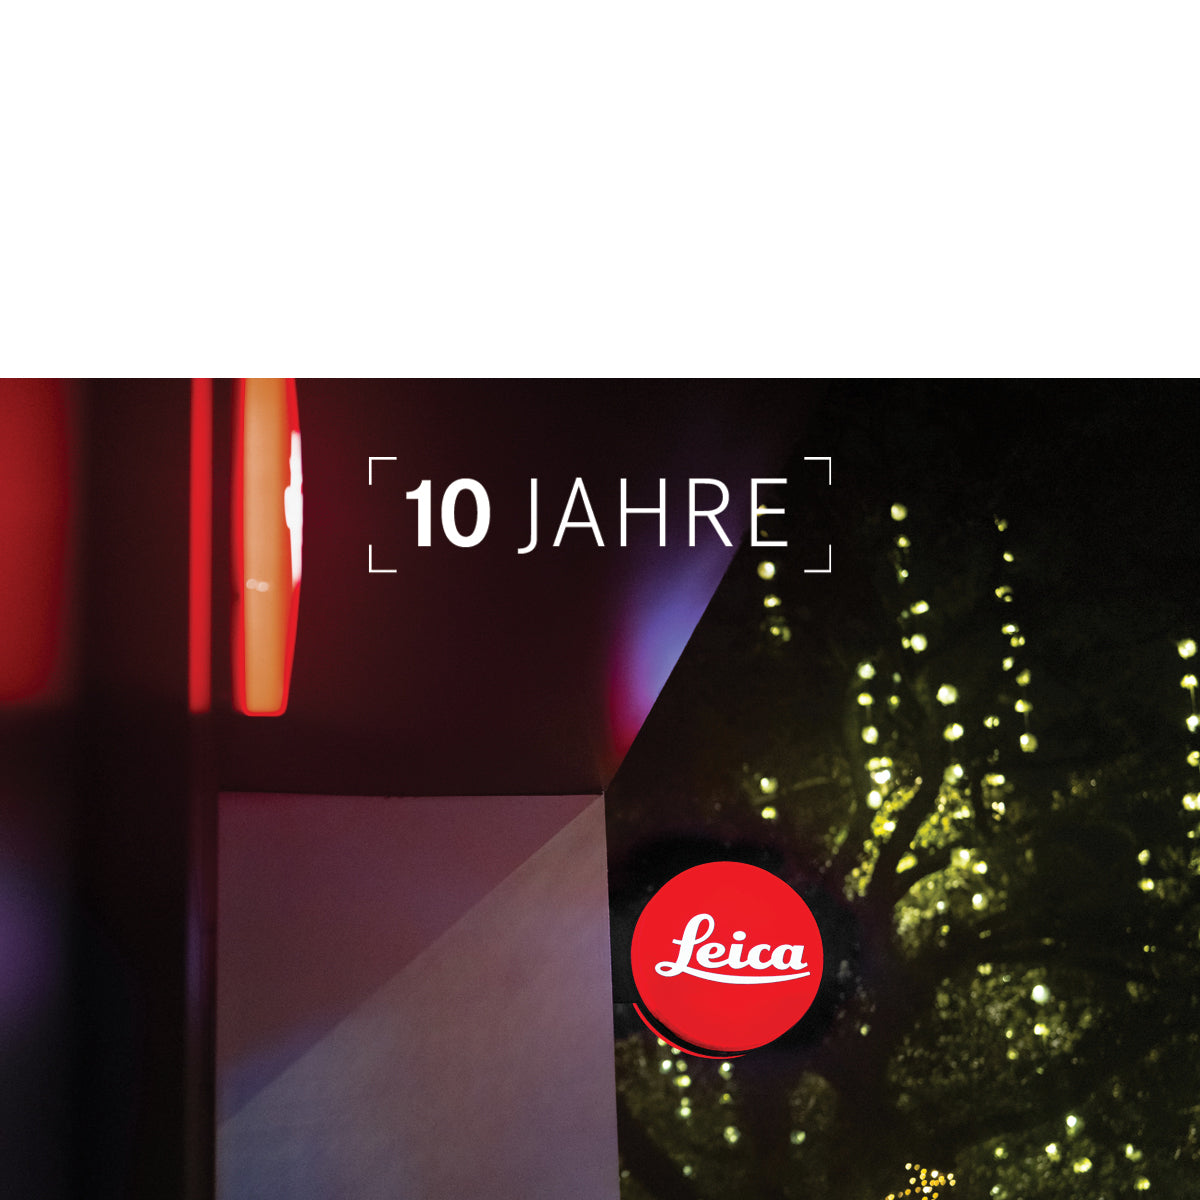 LEICA STORE MIAMI 10 JAHRE ANNIVERSARY PARTY | Friday, March 3, 2023, 7:30pm - 10:00pm